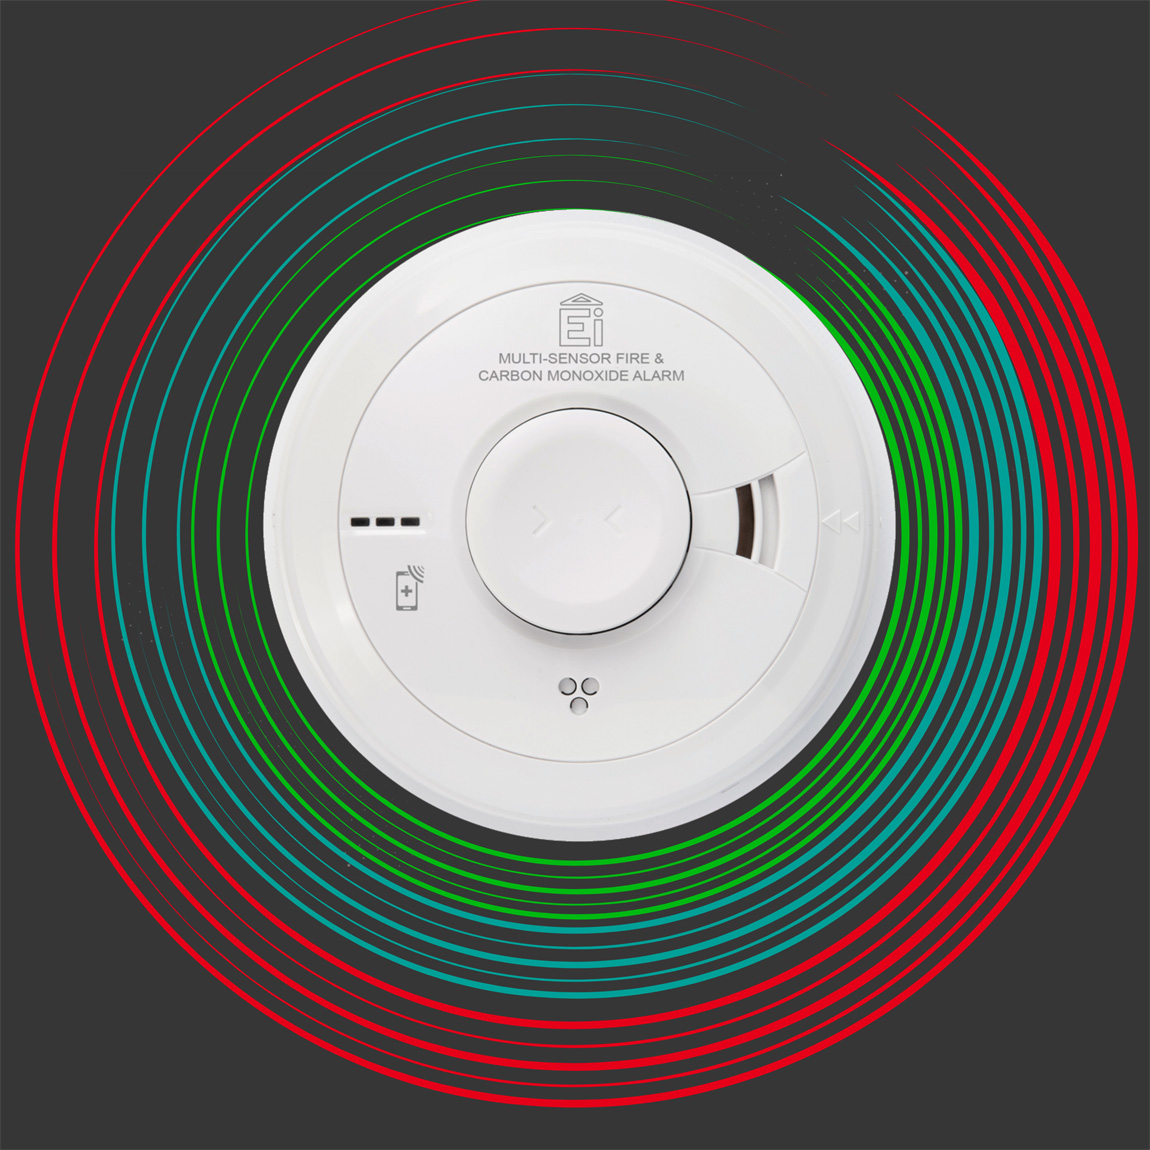 Aico introduces the Ei3030 — the next evolution in Home Life Safety